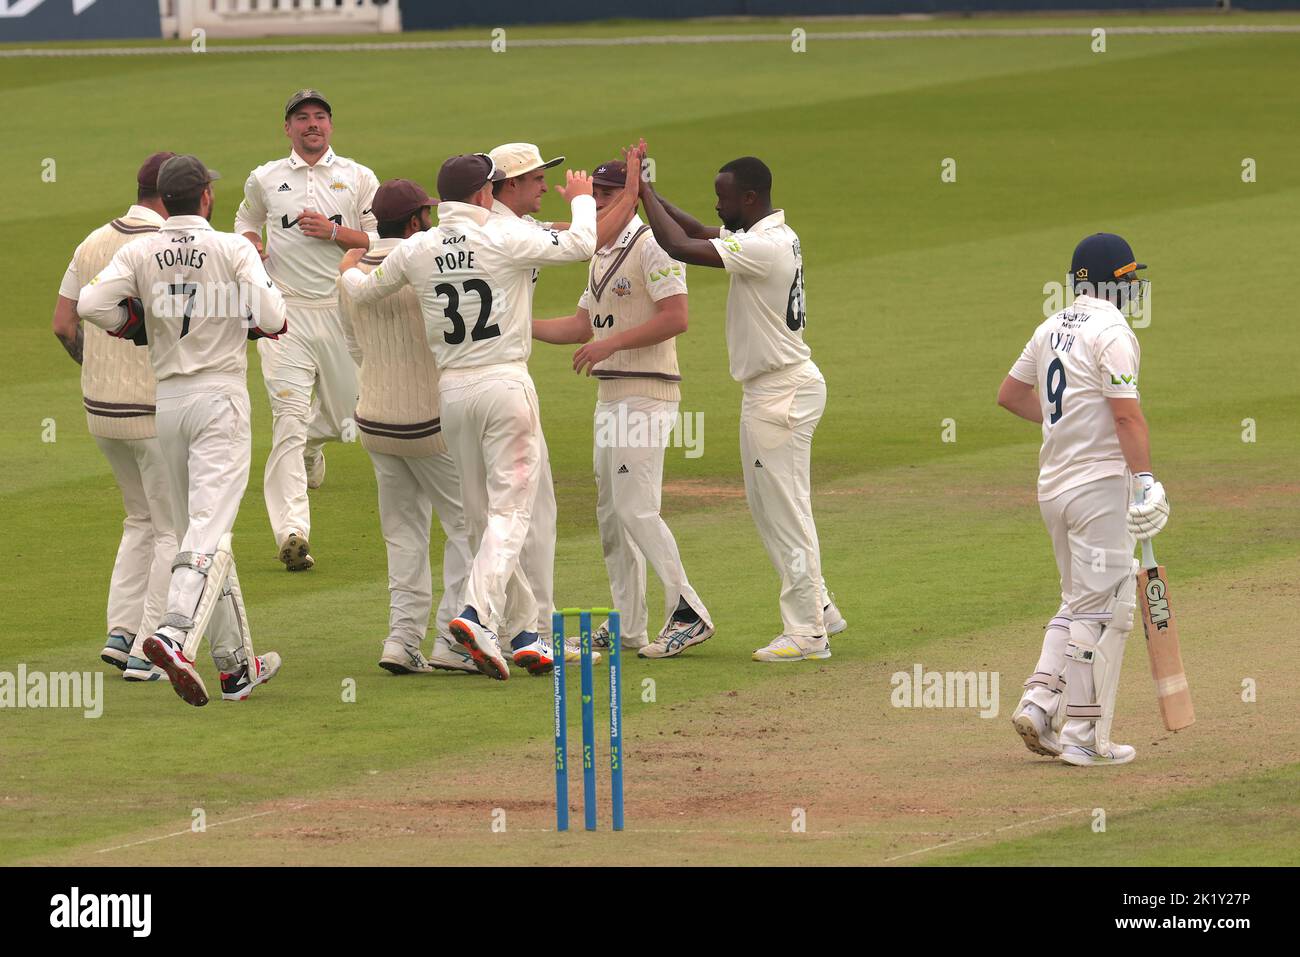 21 September, 2022. London, UK. Yorkshire’s Adam Lyth caught Ryan Patel bowled Kemar Roach as Surrey take on Yorkshire in the County Championship at the Kia Oval, day two. David Rowe/Alamy Live News Stock Photo